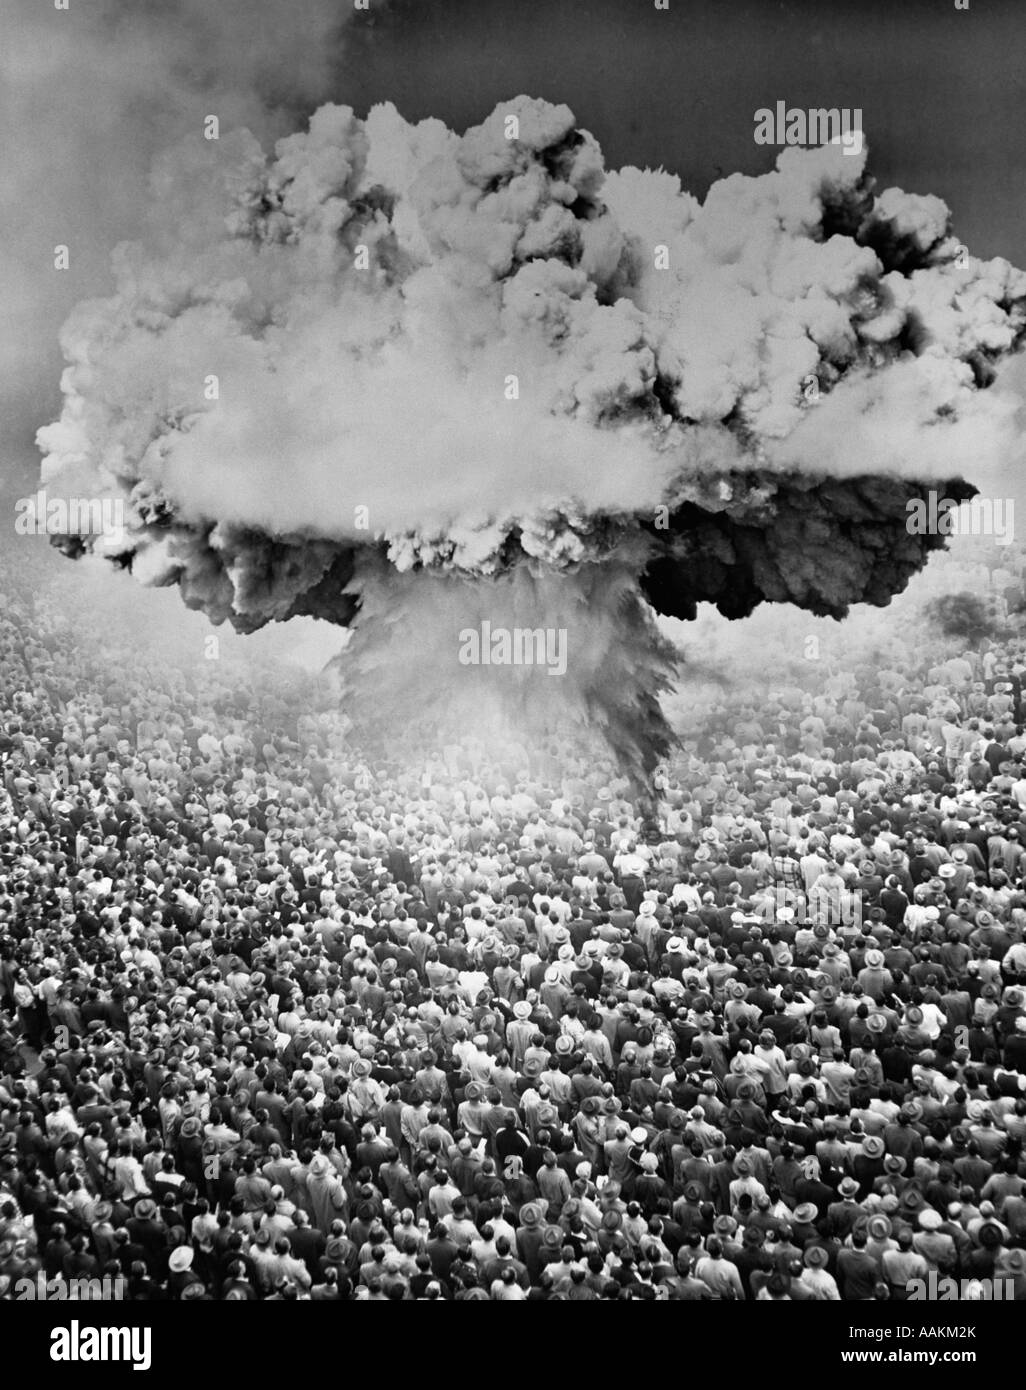 1950s 1960s ATOMIC BOMB SYMBOLIC MONTAGE MUSHROOM CLOUD OVER A VERY LARGE CROWD OF PEOPLE FACING THE EXPLOSION Stock Photo